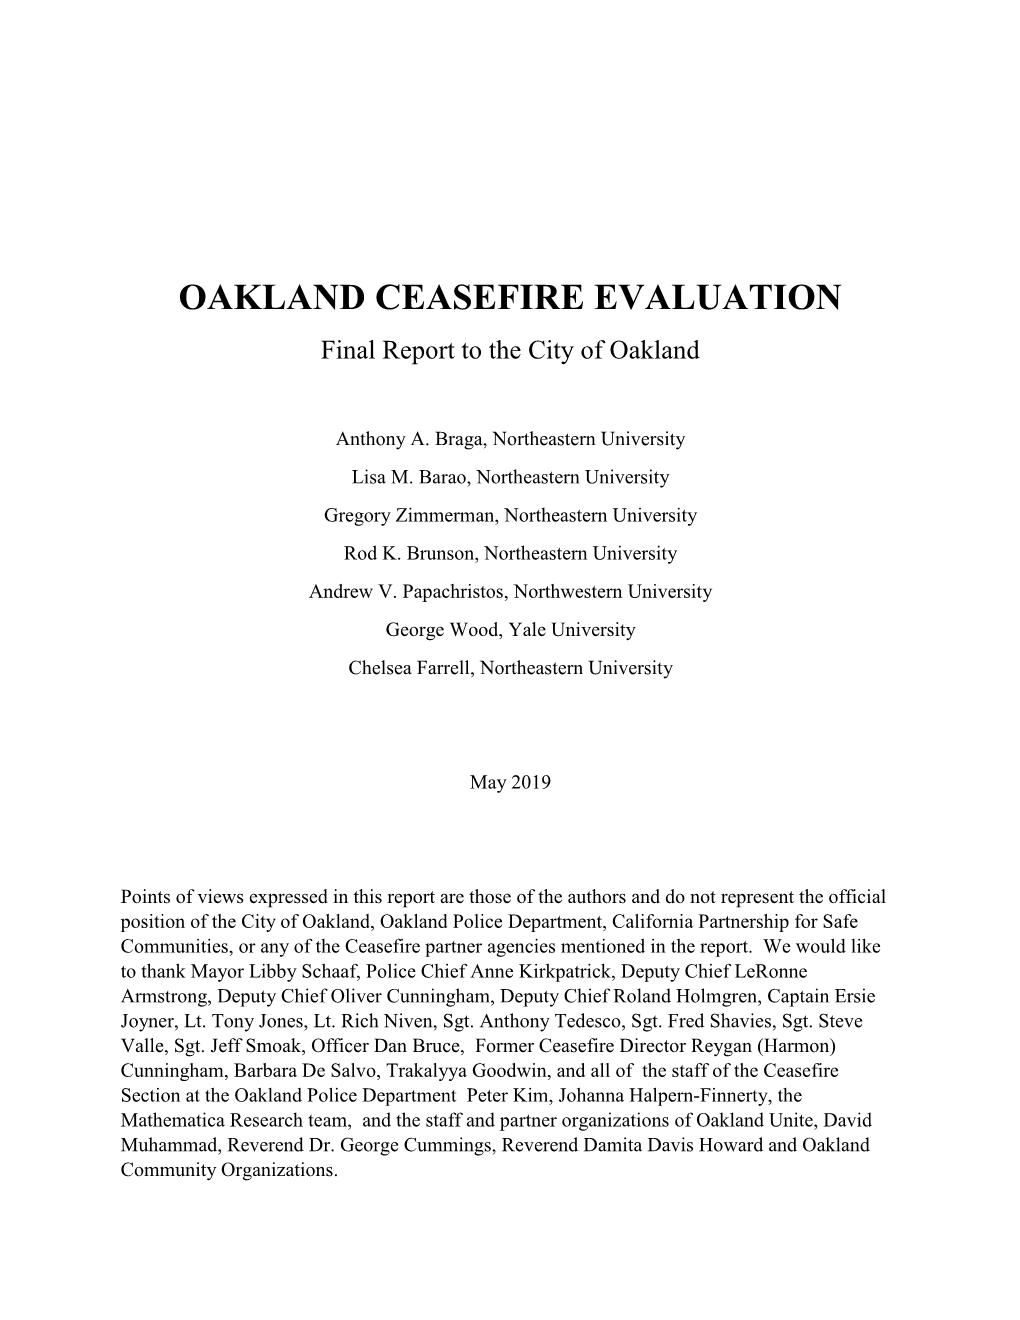 OAKLAND CEASEFIRE EVALUATION Final Report to the City of Oakland